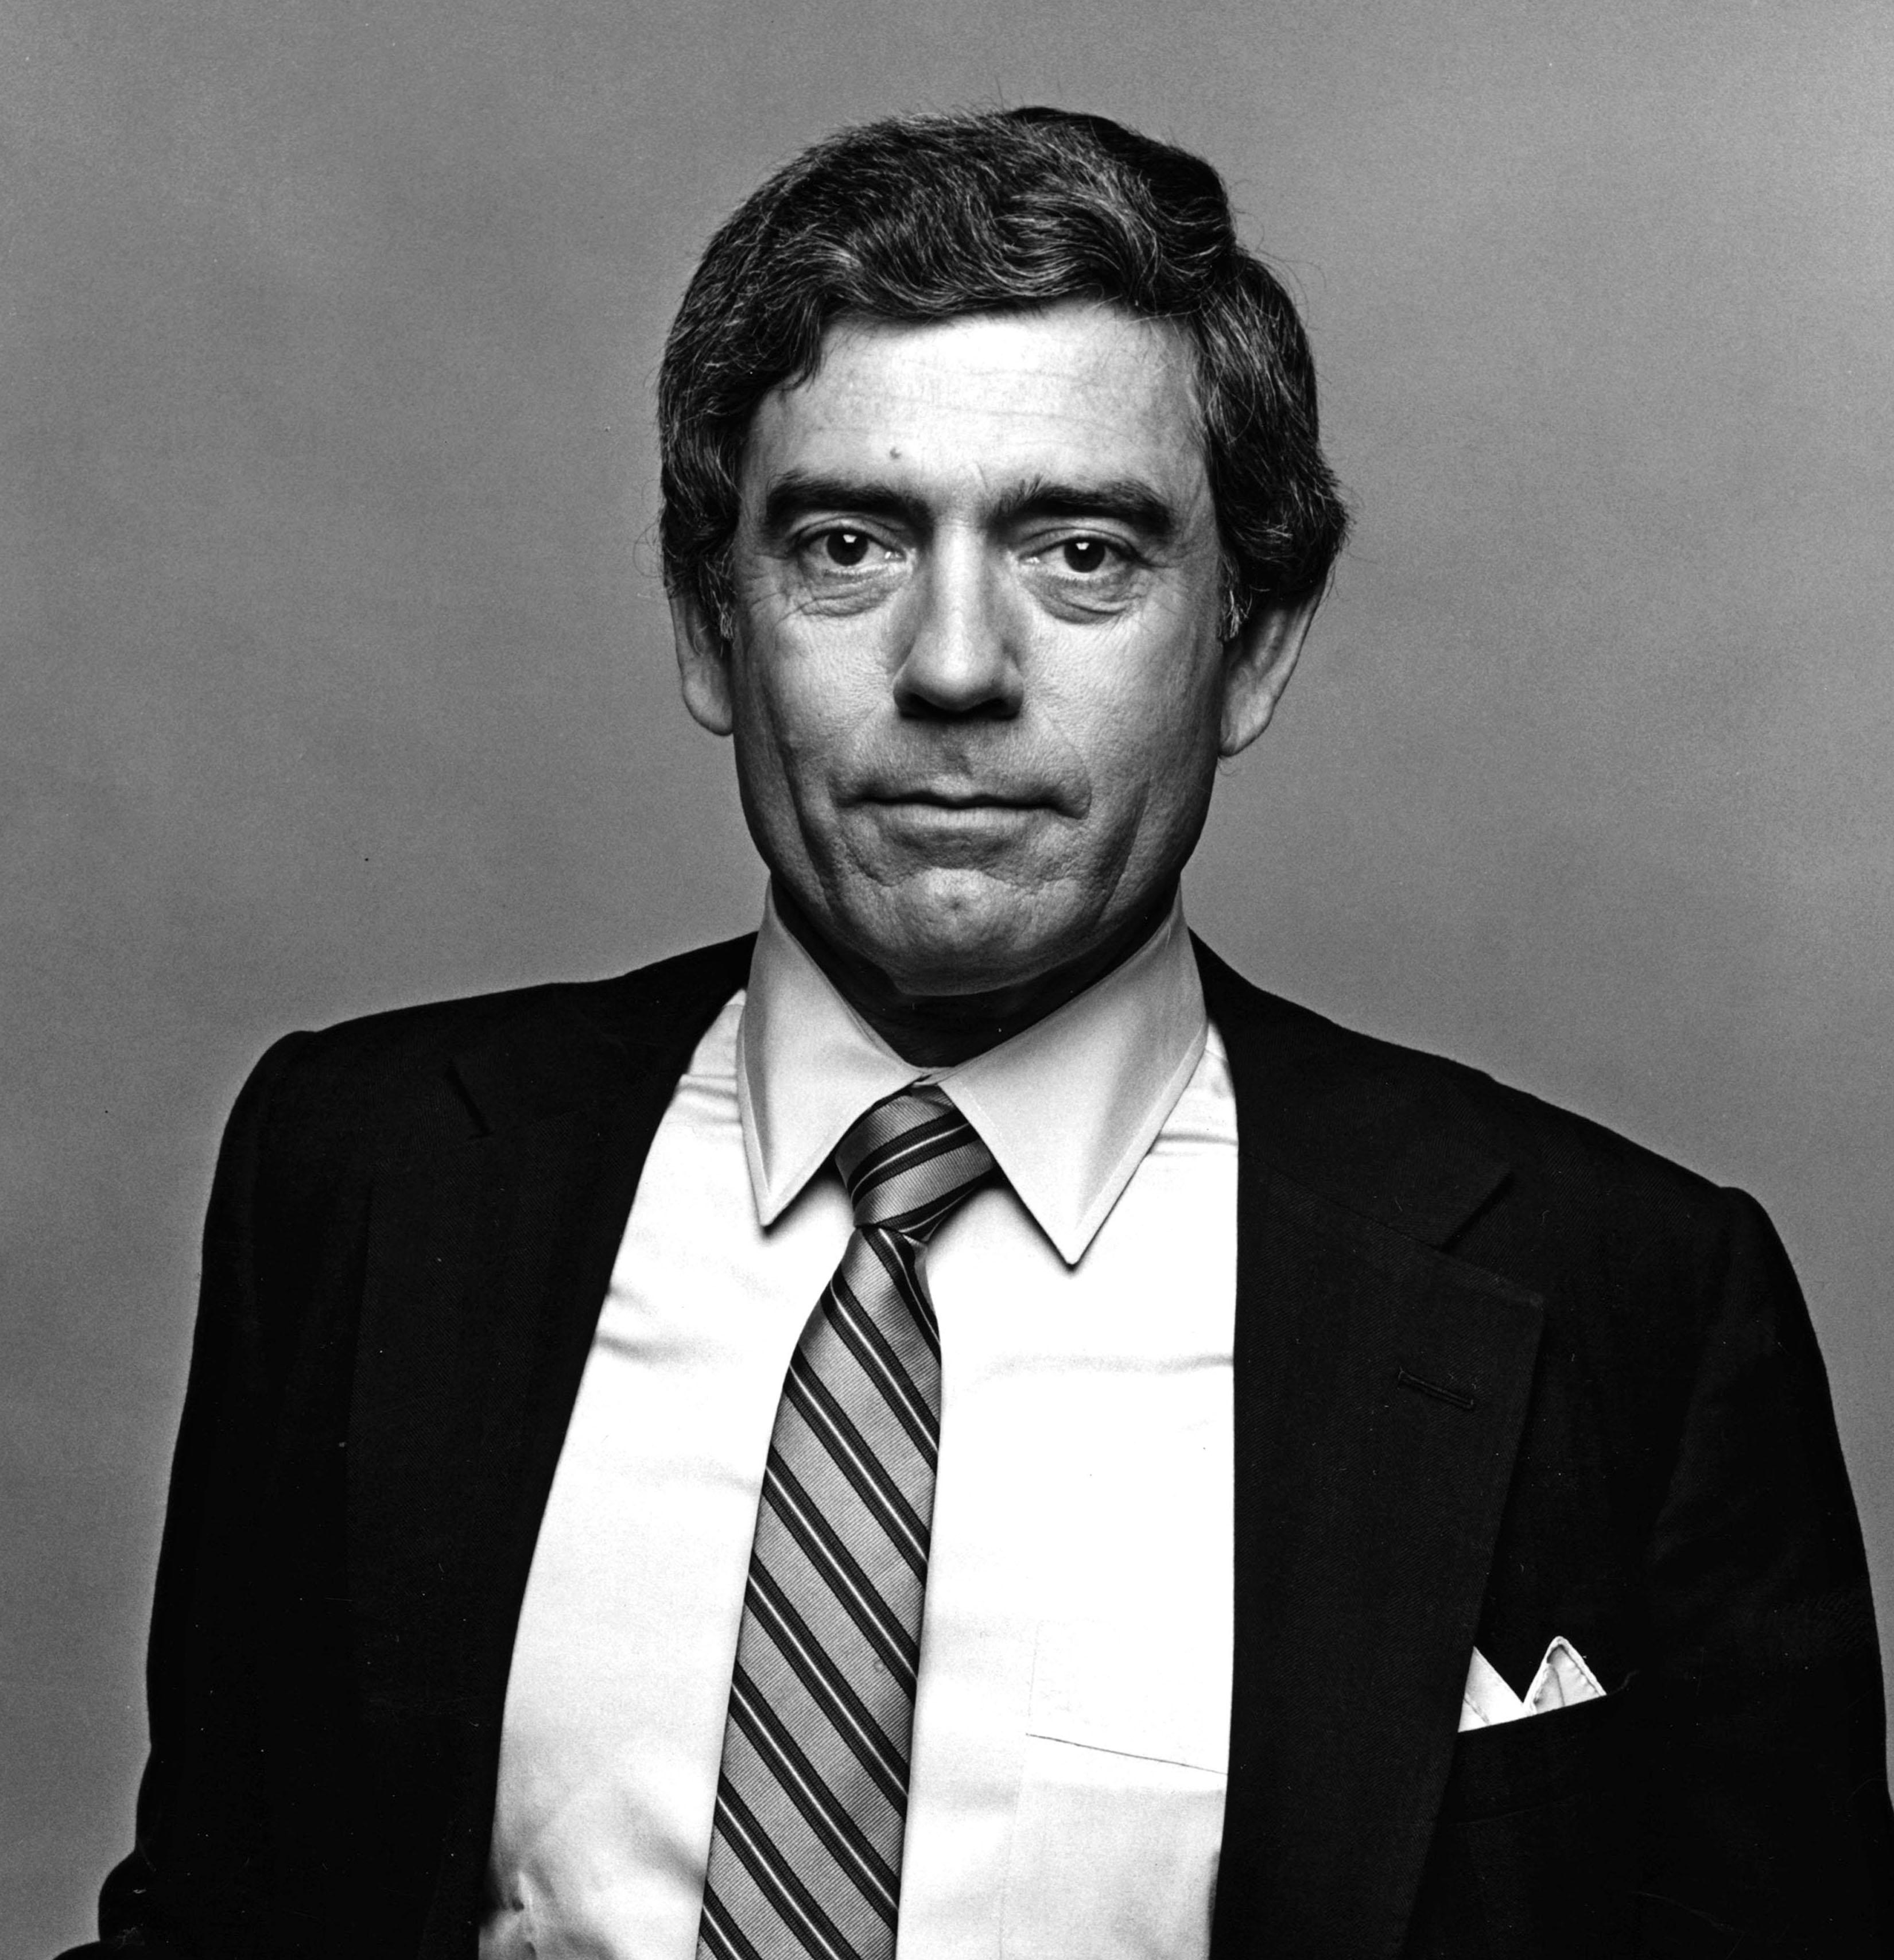 CBS News anchor Dan Rather - Photograph by Jack Mitchell